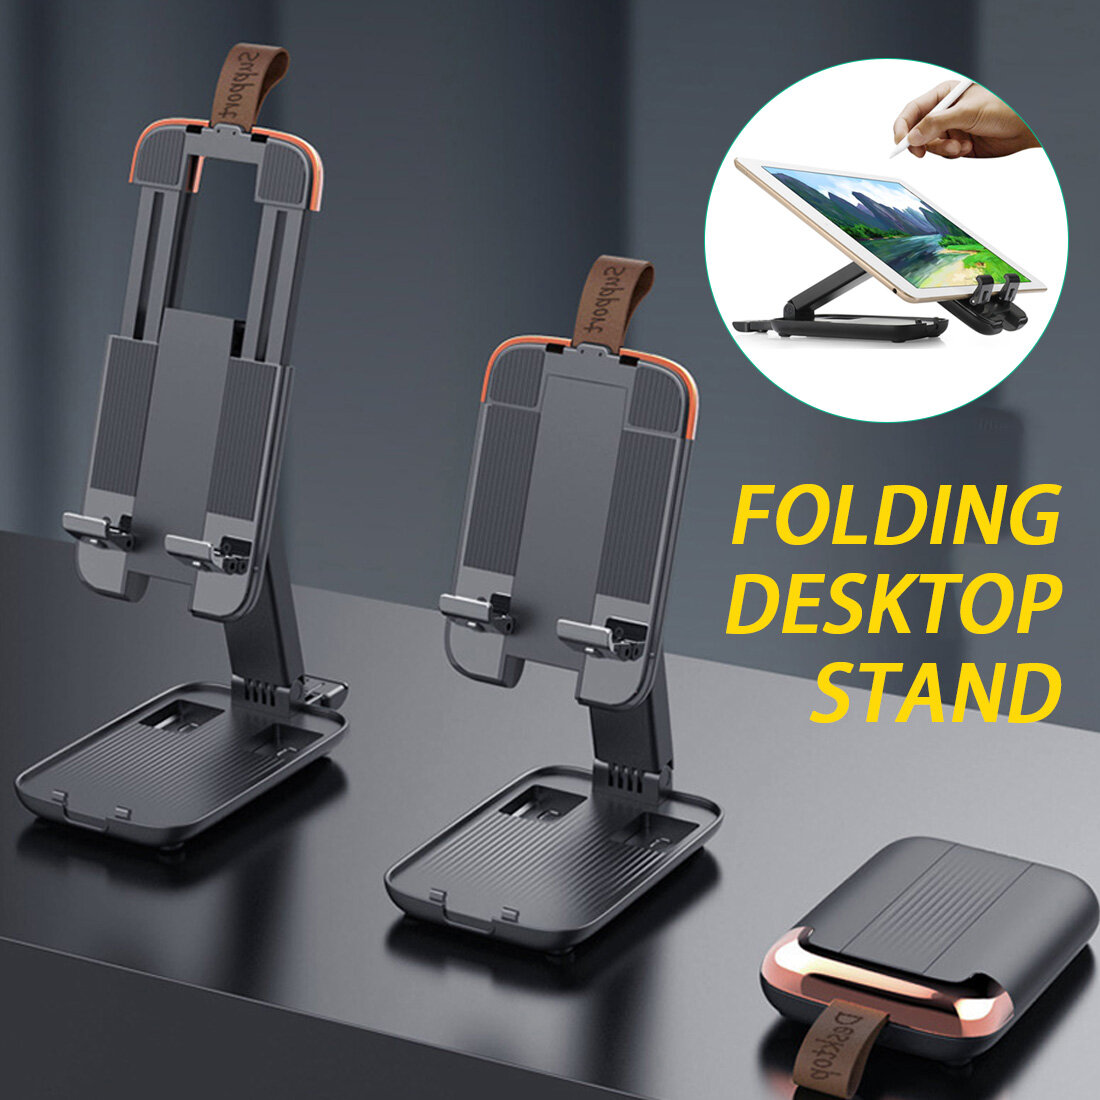 Bakeey Folding Stretchable Phone/ Tablet Holder Stand Desktop Bracket for iPad Pro POCO F3 Devices below 4-13 inch